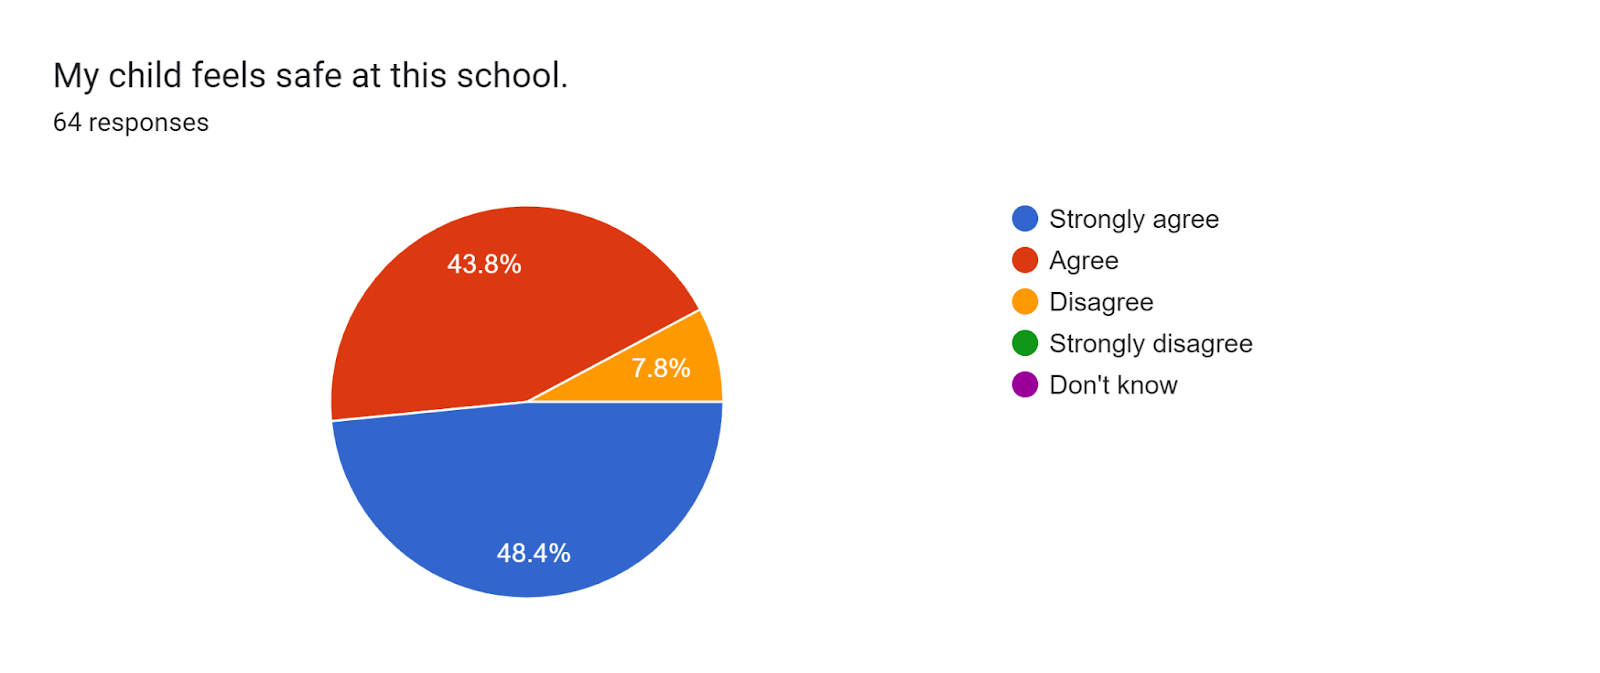 Forms response chart. Question title: My child feels safe at this school.. Number of responses: 64 responses.